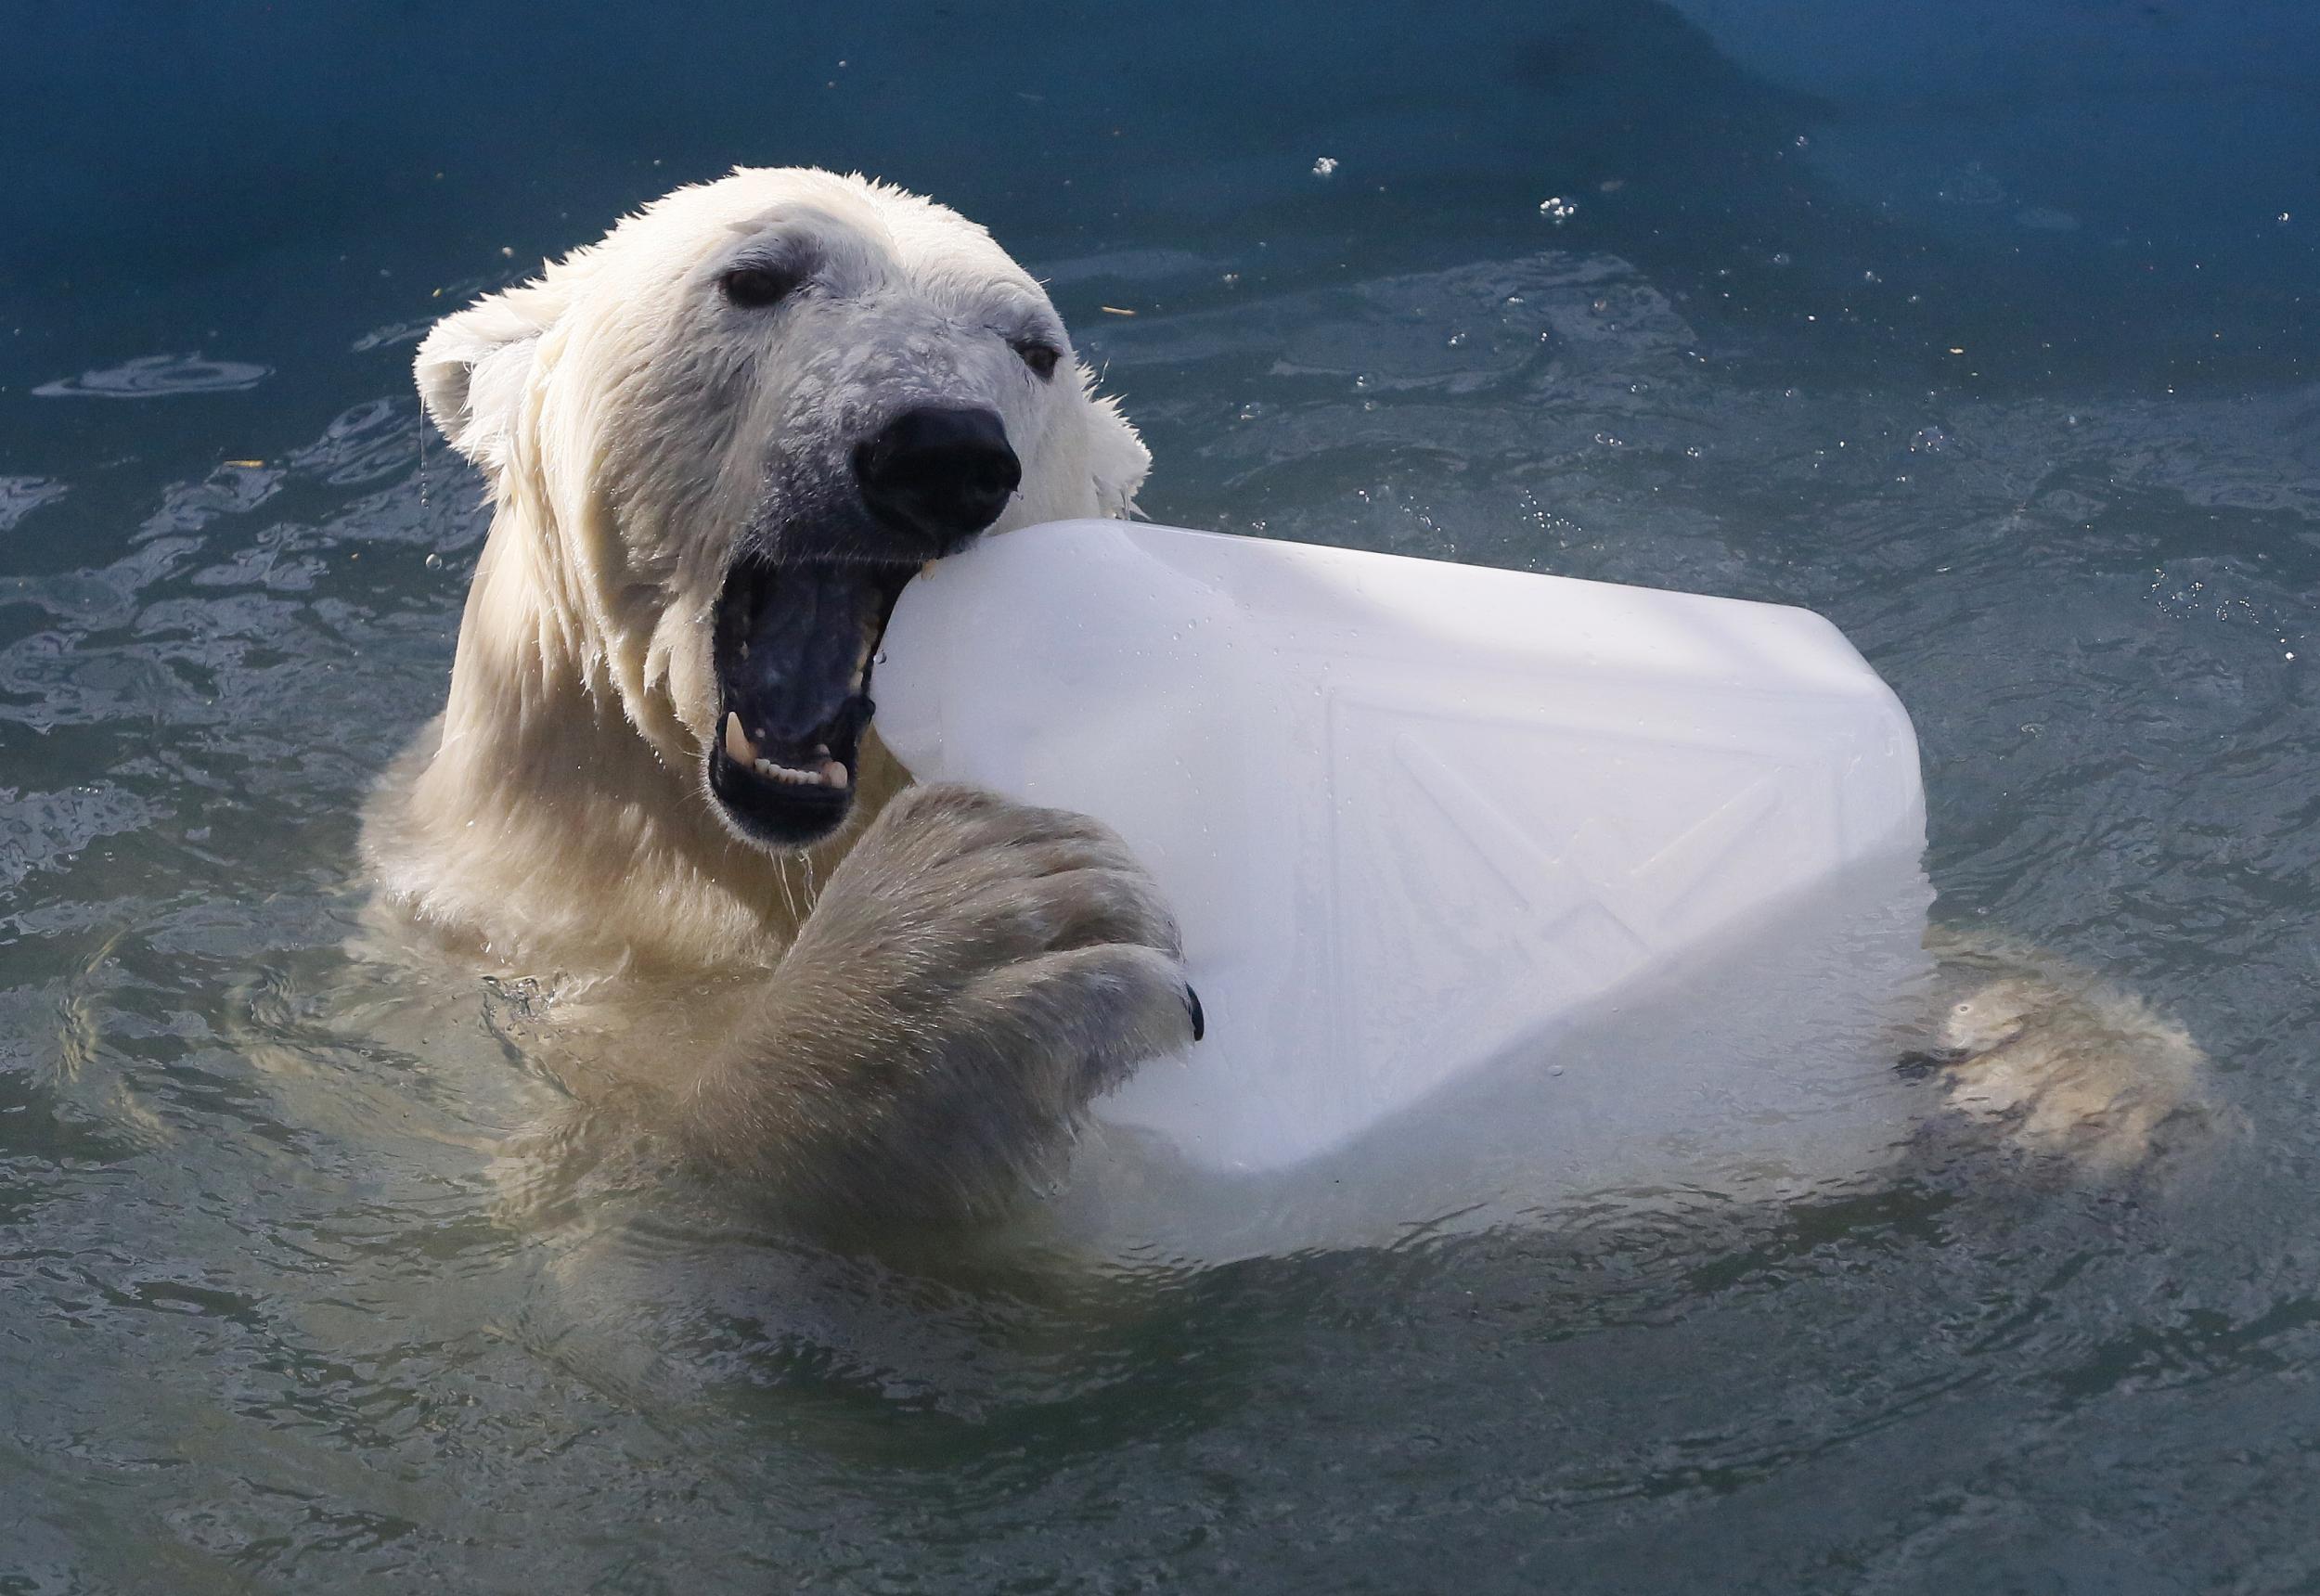 Polar bears and other species impacted by climate change could face weakened protections under new proposals the modify the implementation of the Endangered Species Act.